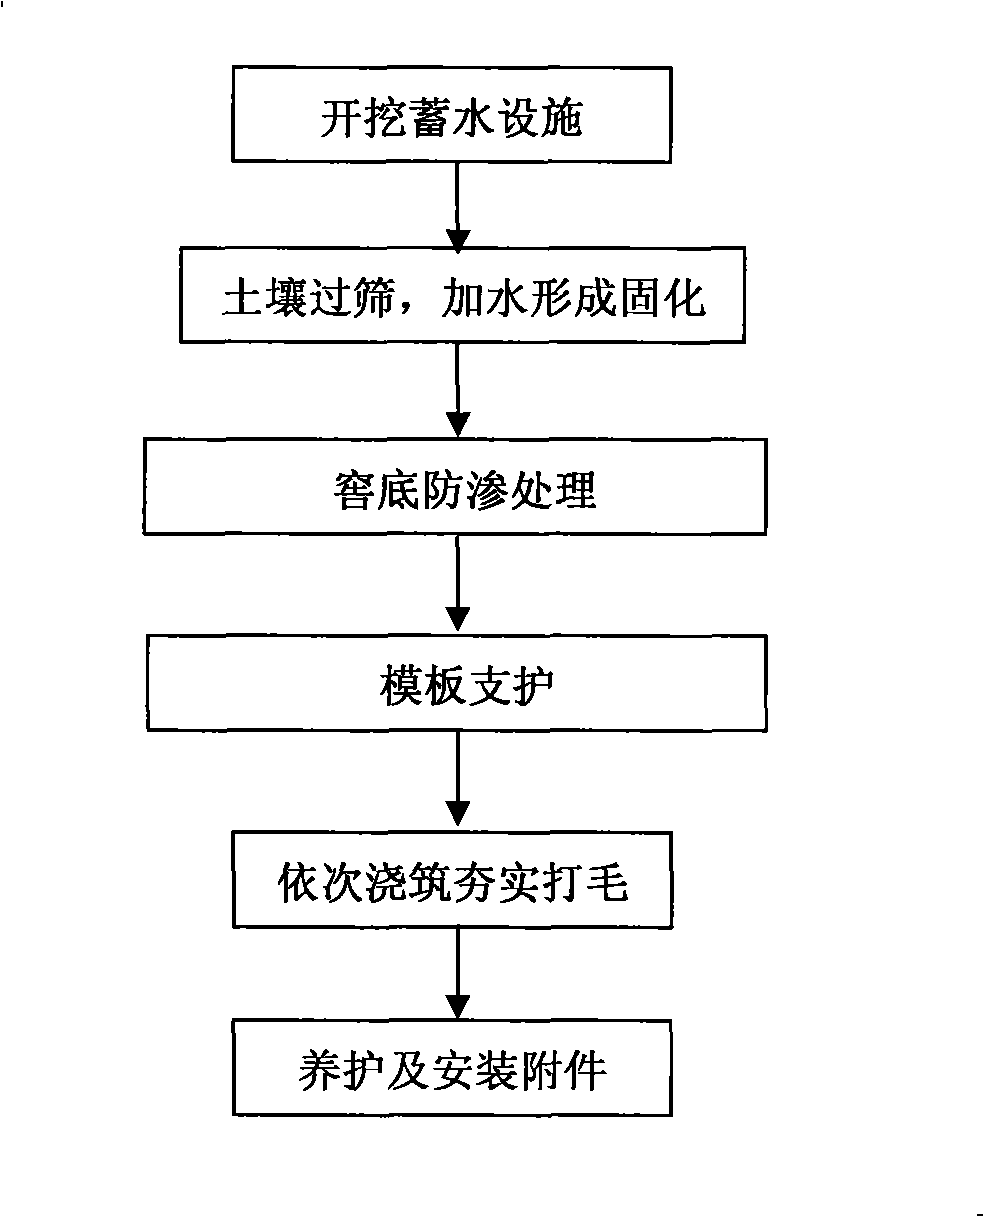 Construction method for building water storage facilities by using soil solidification material